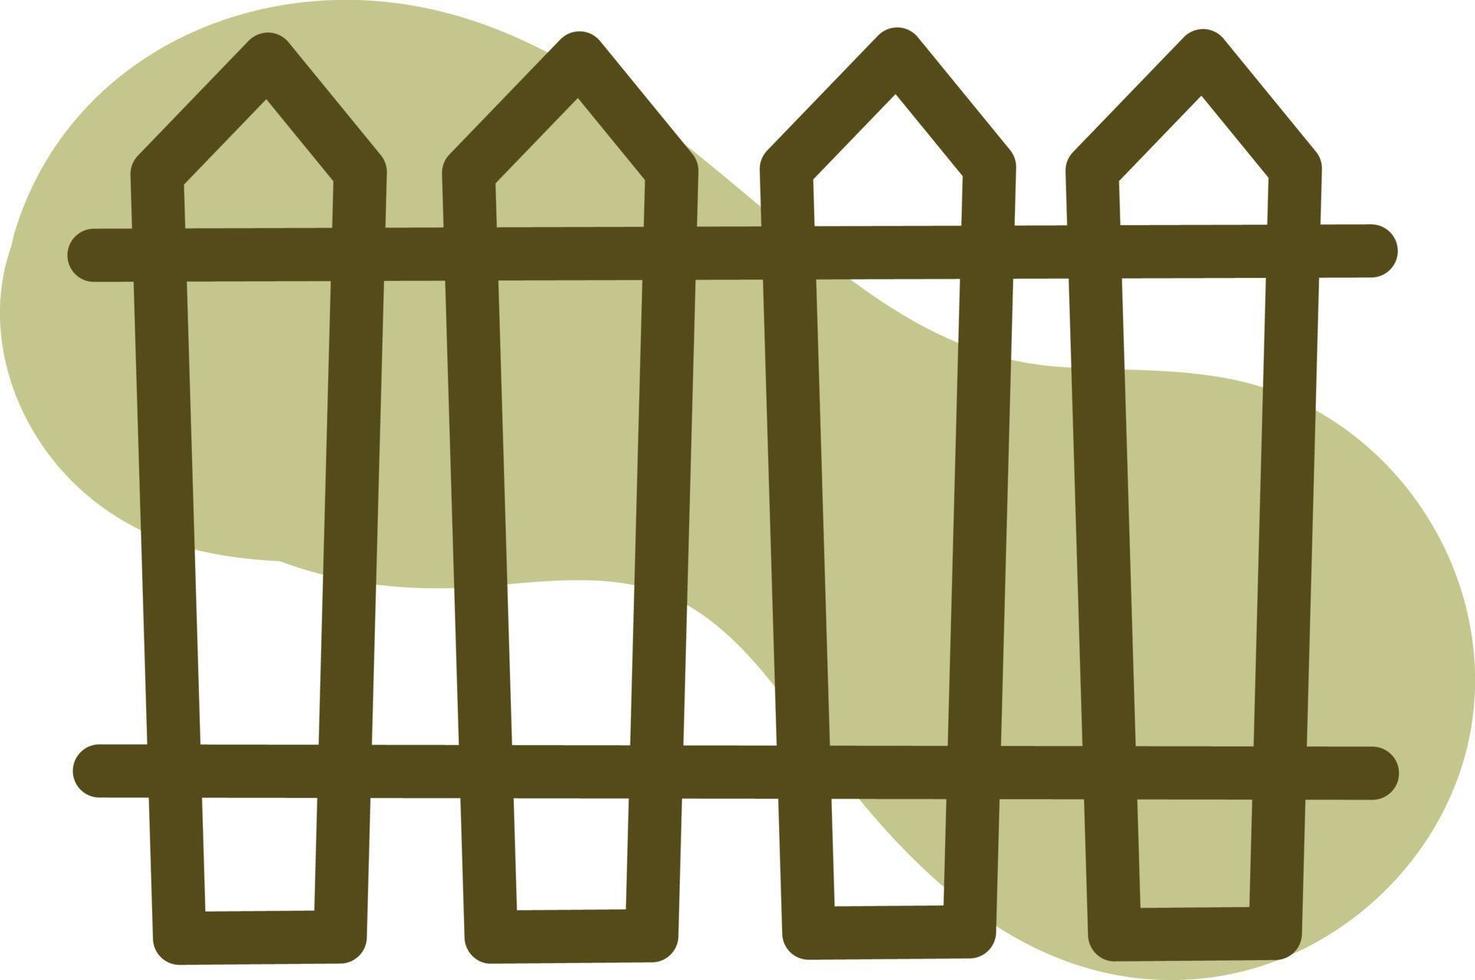 Gardening fence, illustration, vector on a white background.